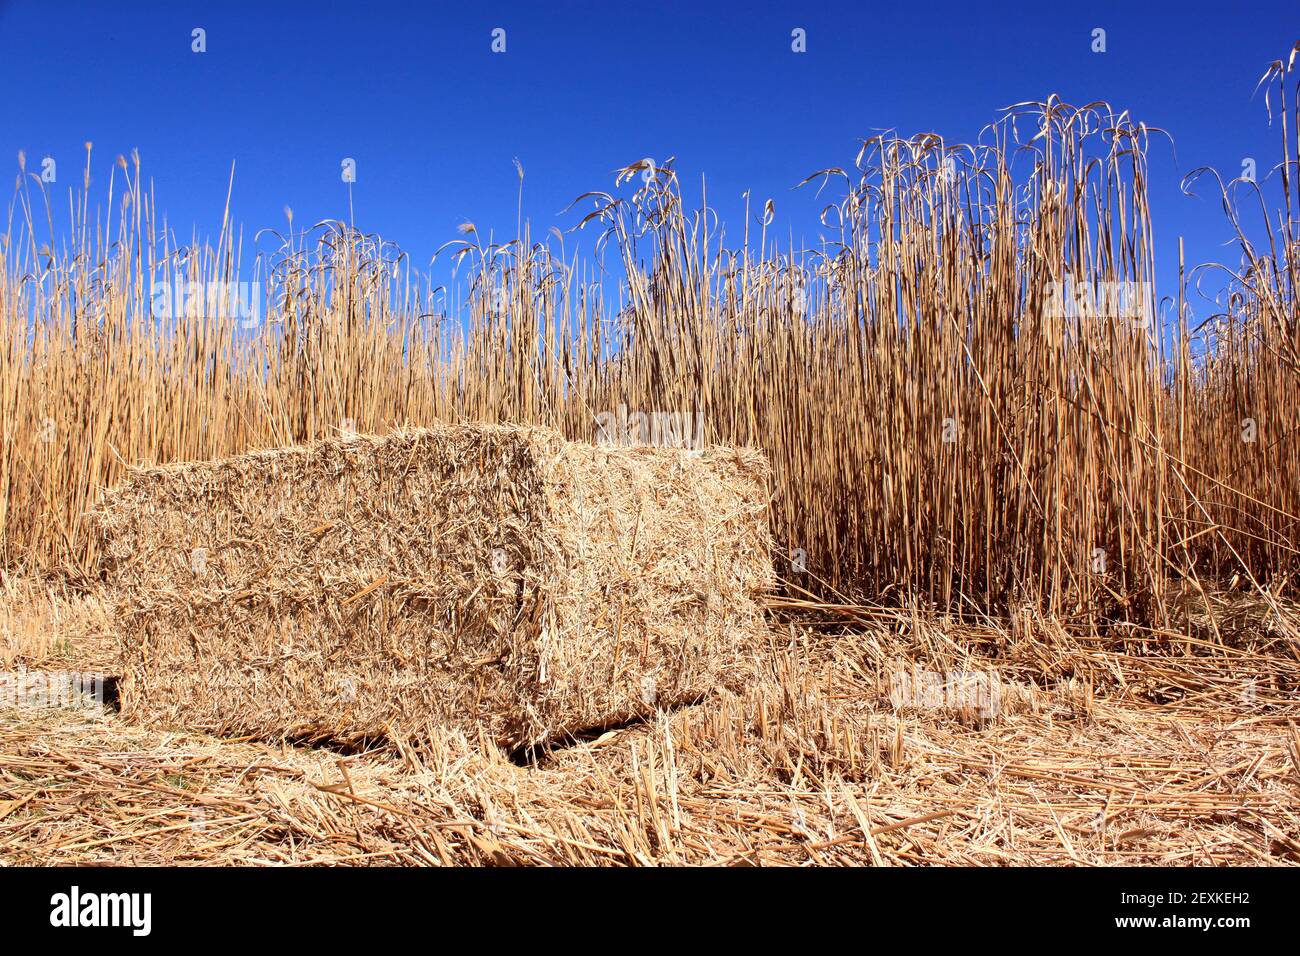 Field of reeds Stock Photo